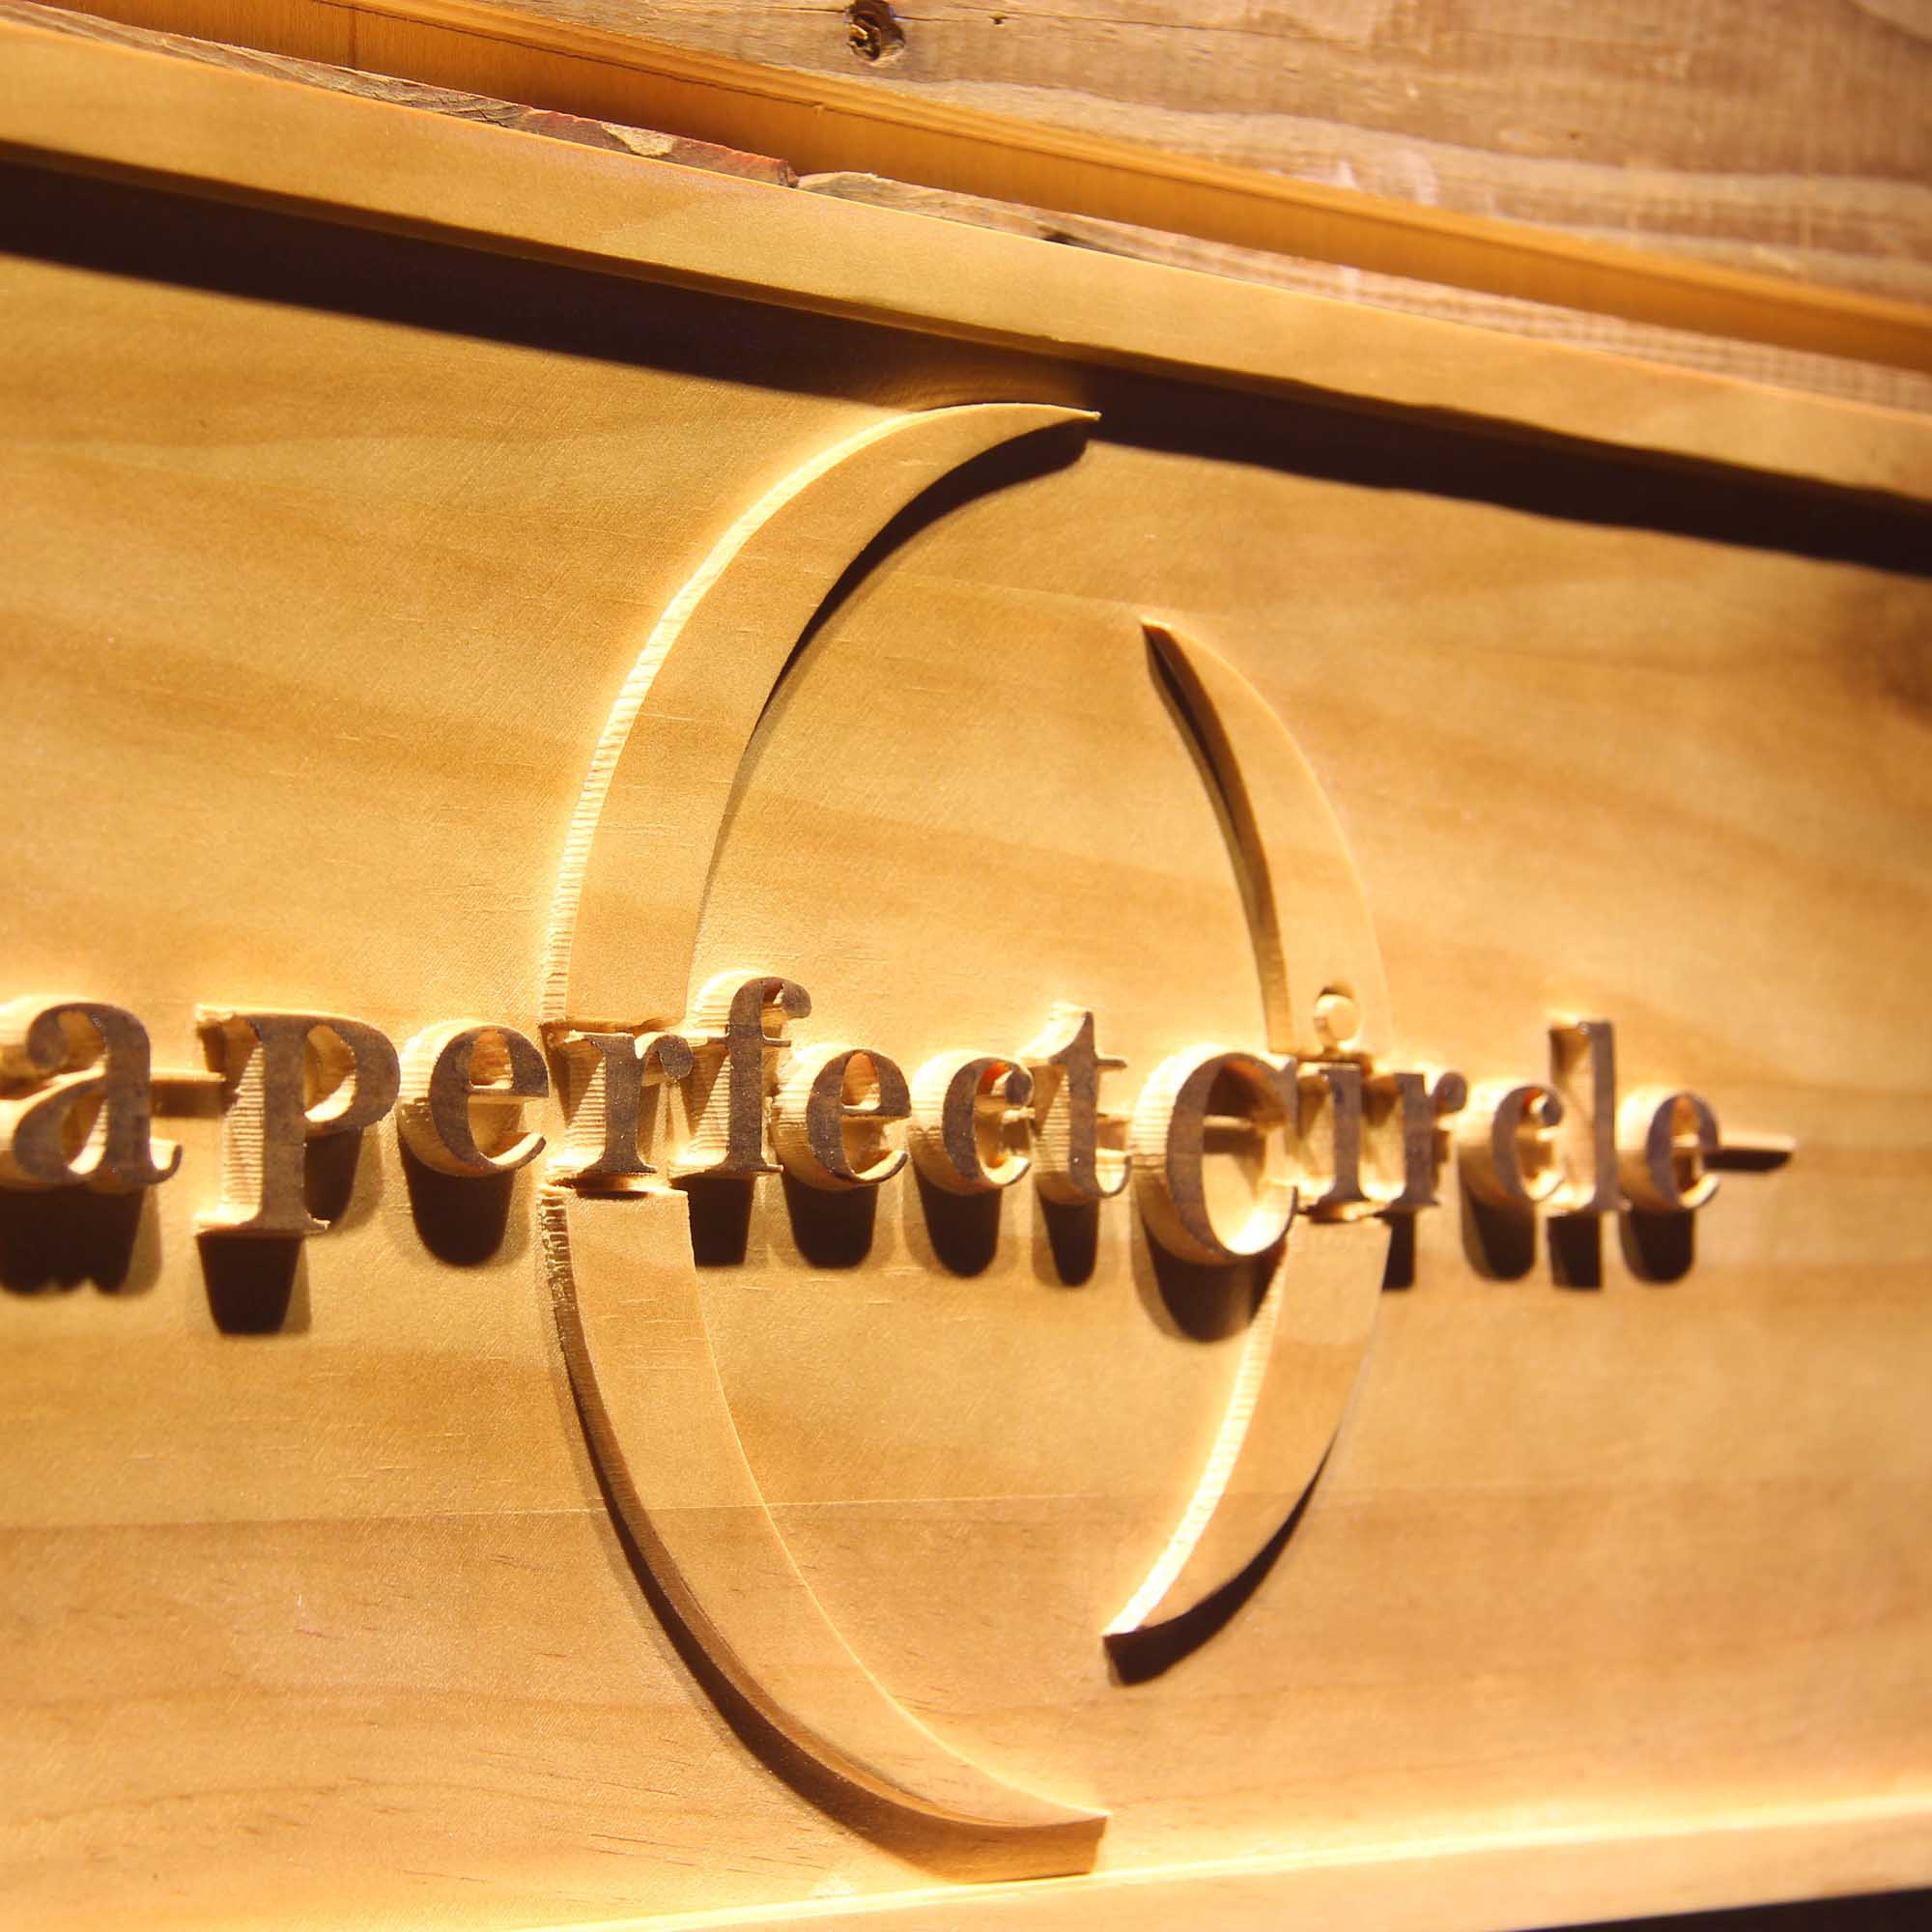 A Perfect Circle 3D Wooden Engrave Sign